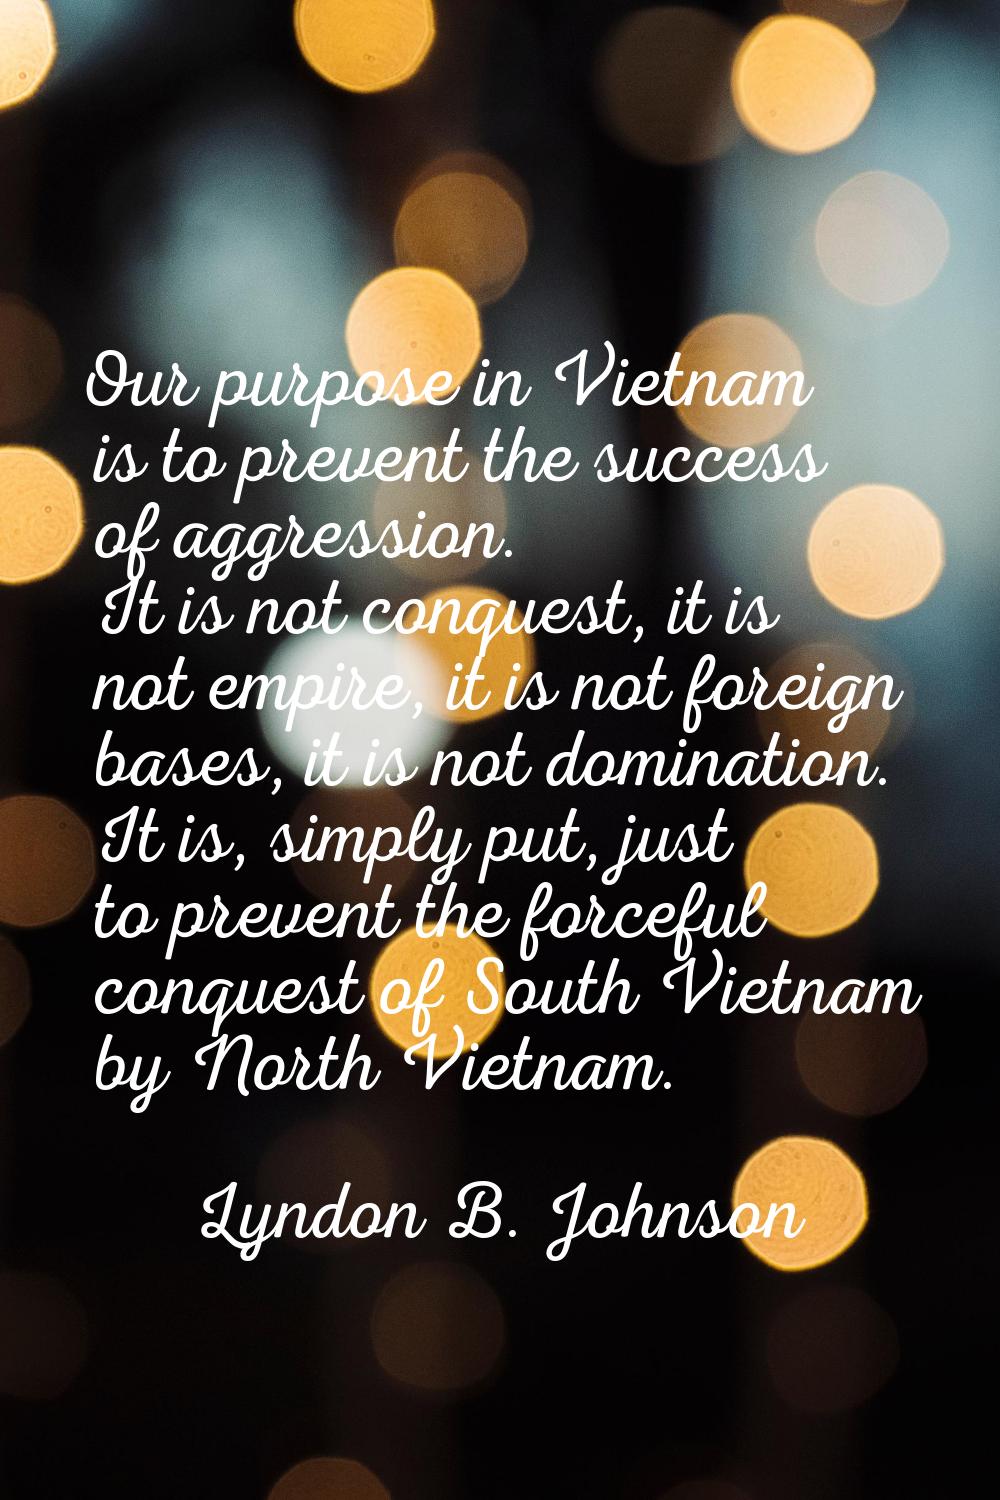 Our purpose in Vietnam is to prevent the success of aggression. It is not conquest, it is not empir